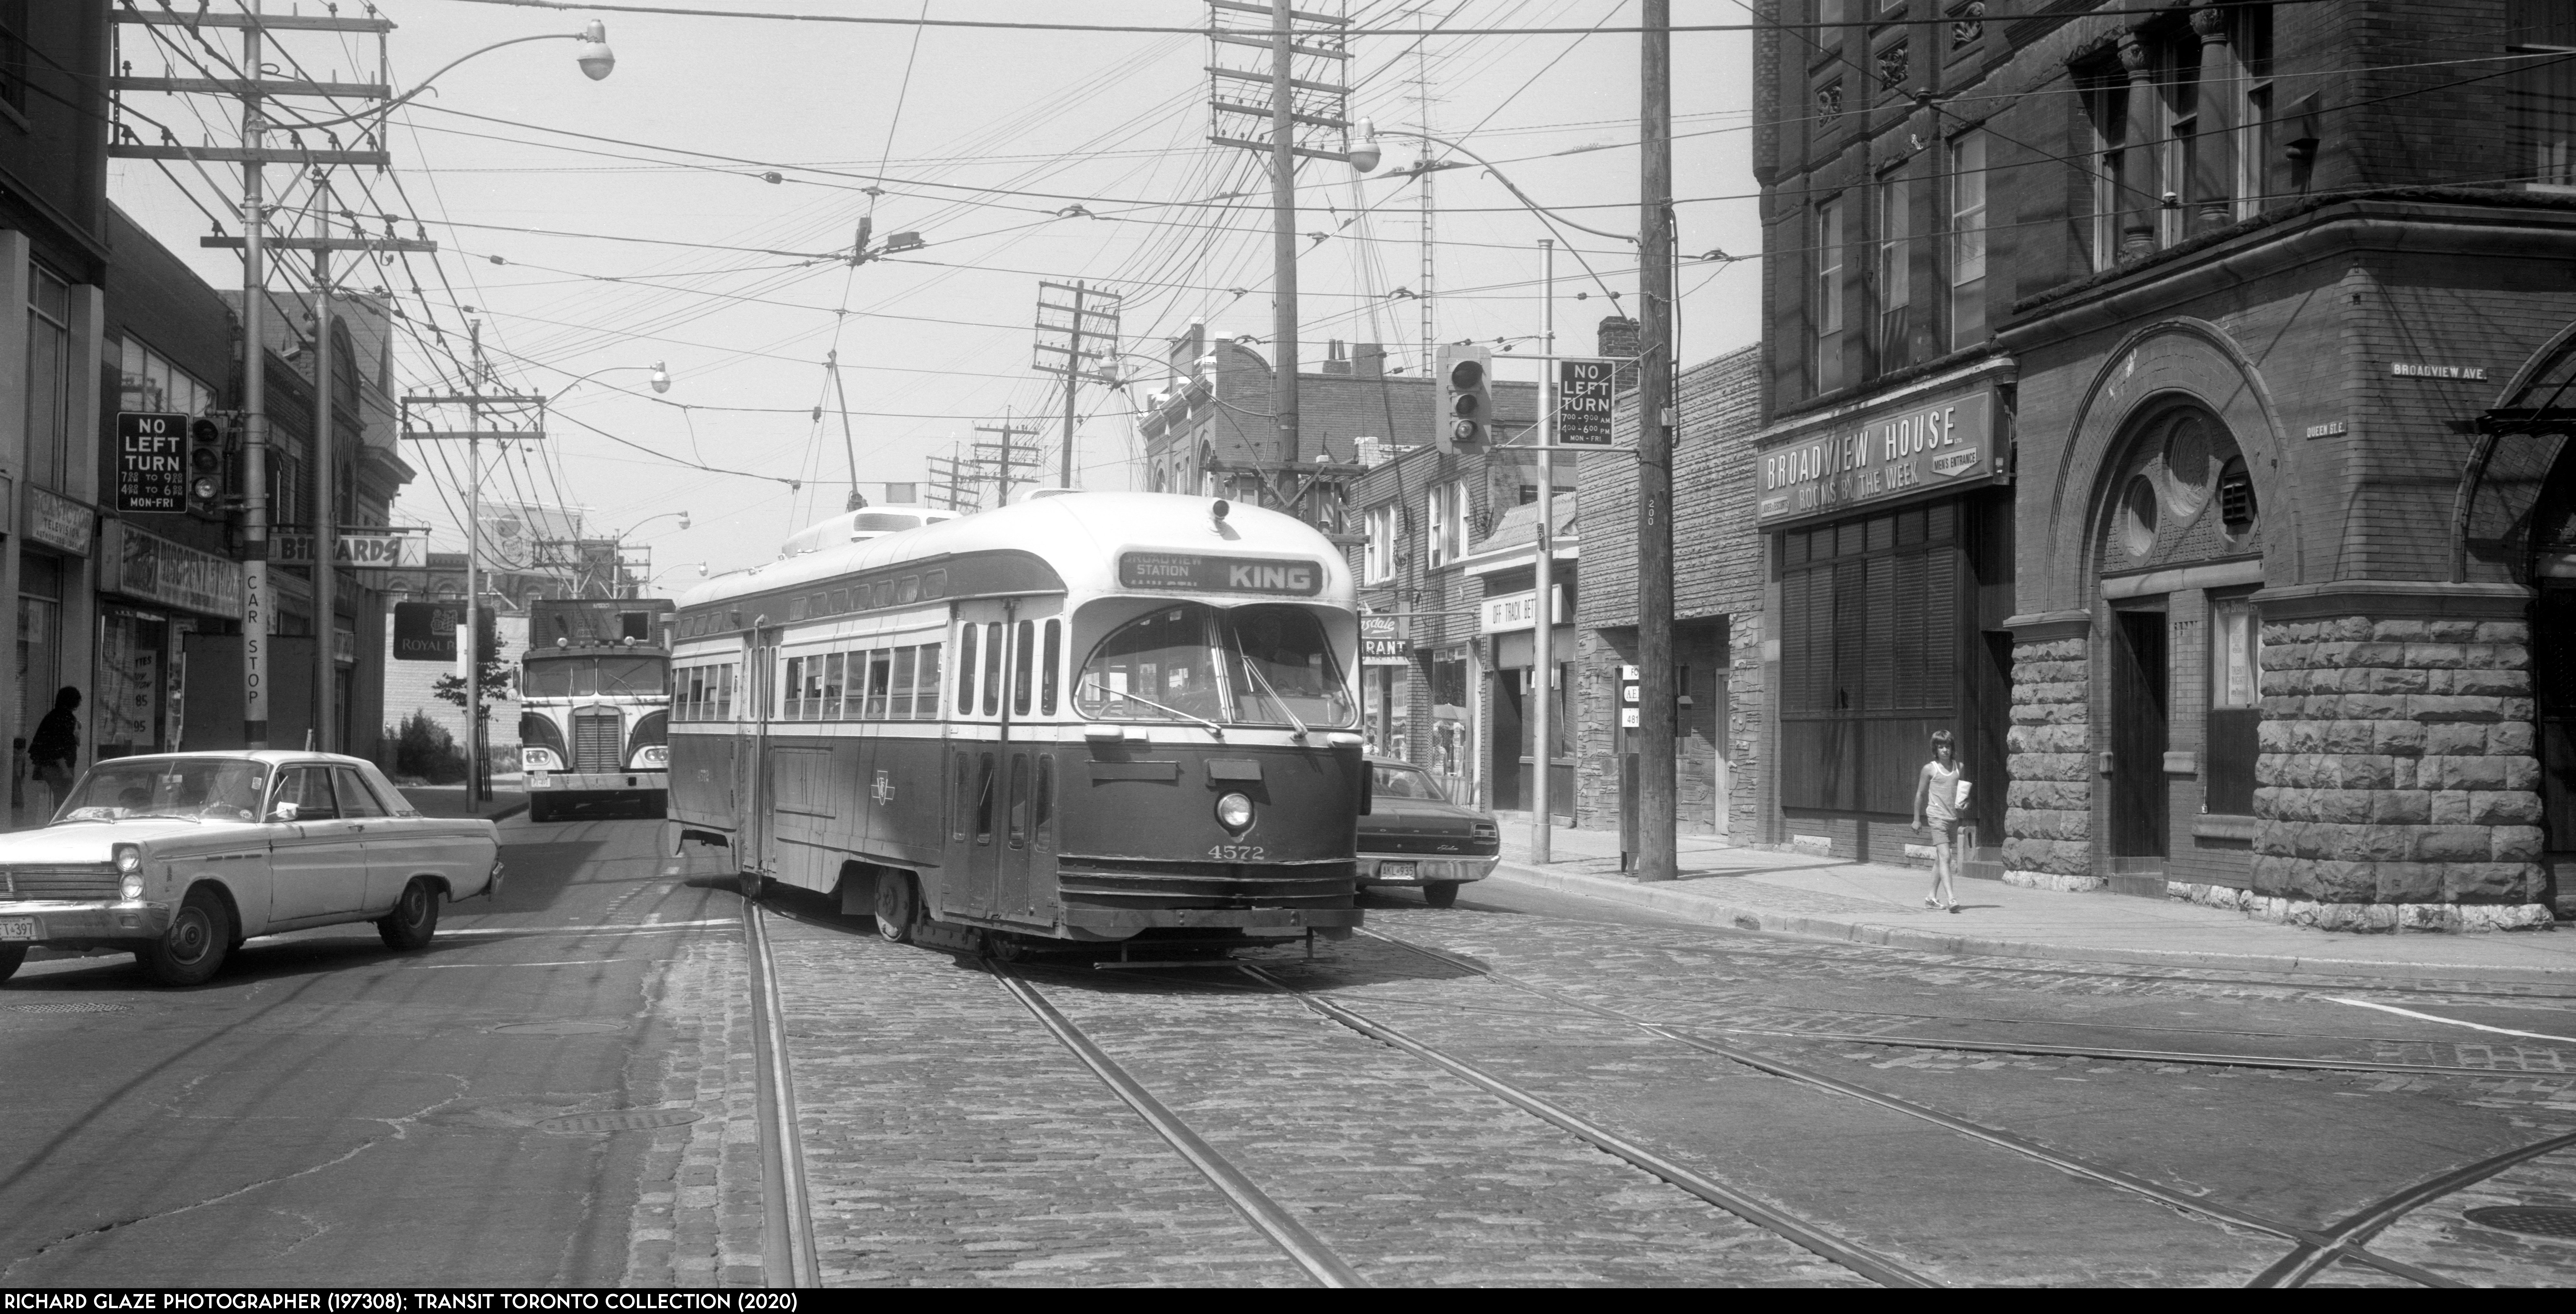 19730815 - 504 King - 4572 EB Queen at Broadview